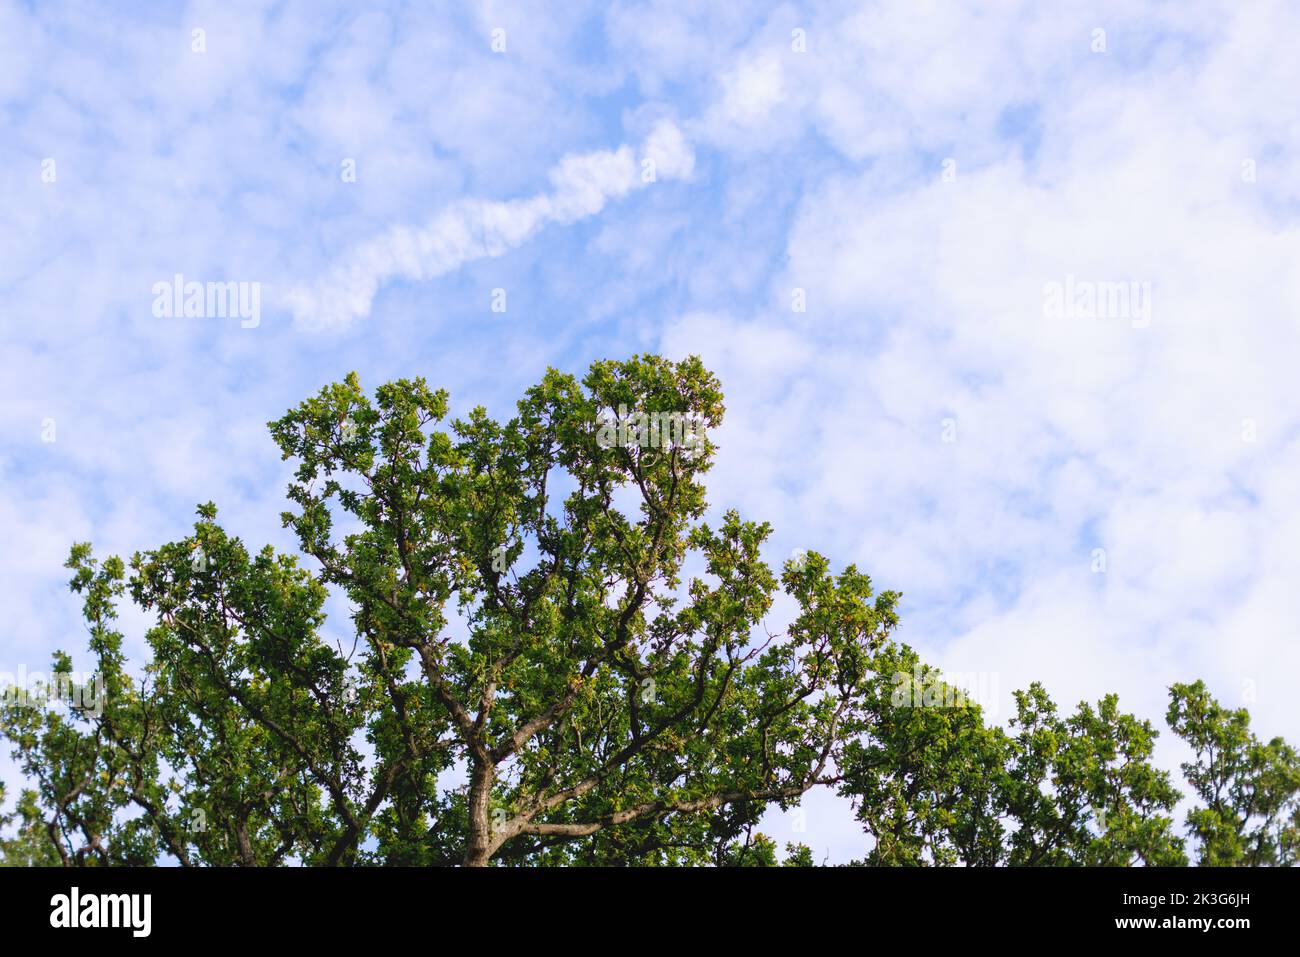 A blue Autumn/ Summer sky full of little white fluffy clouds with the tops of native trees (Oak trees) Stock Photo